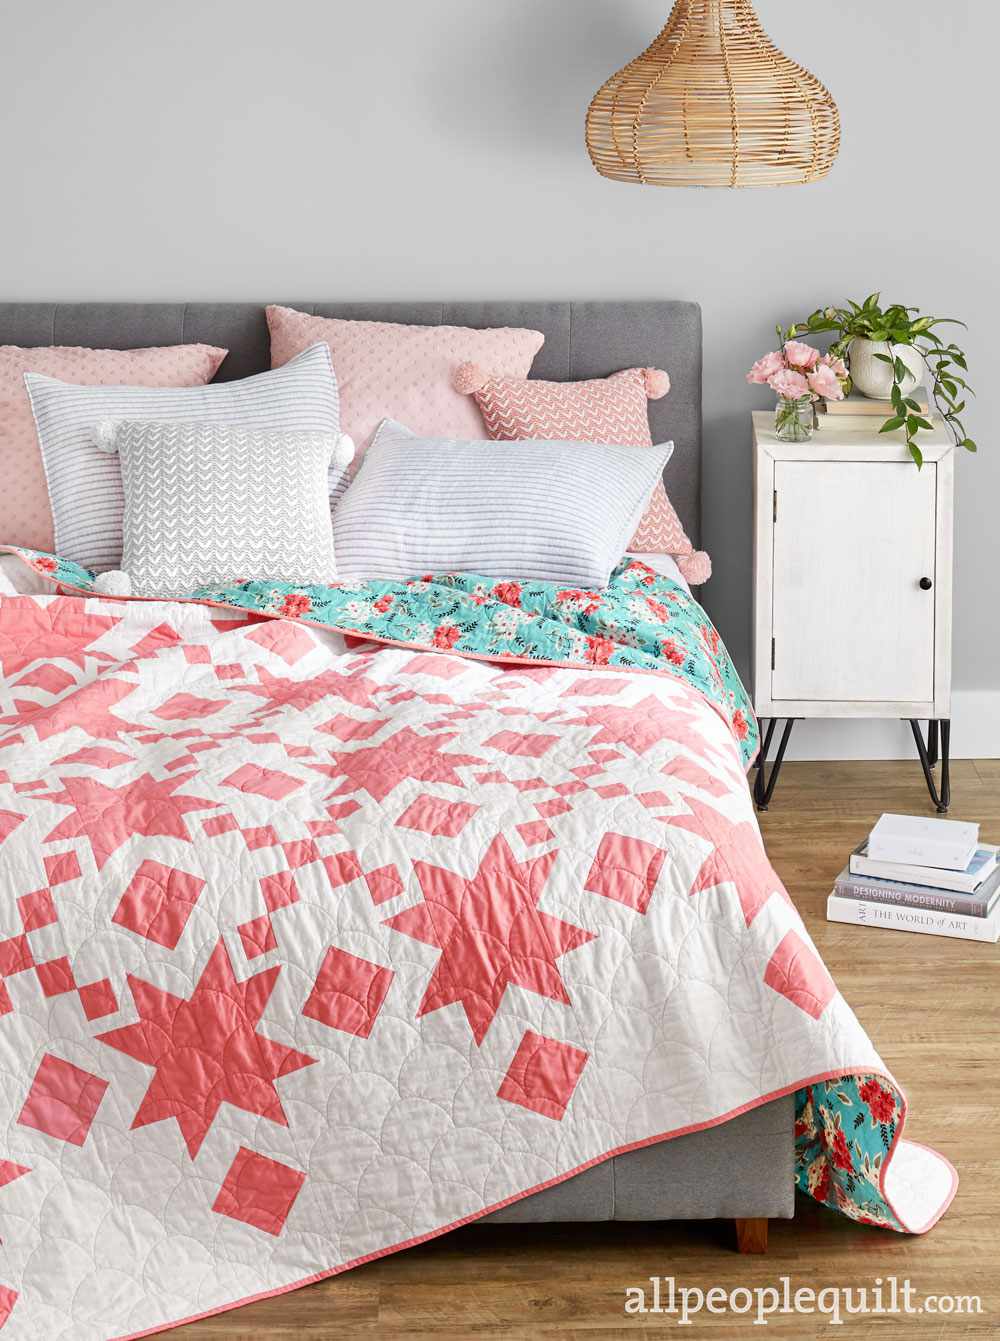 Free Bed Quilt Patterns, Queen Duvet Cover Pattern